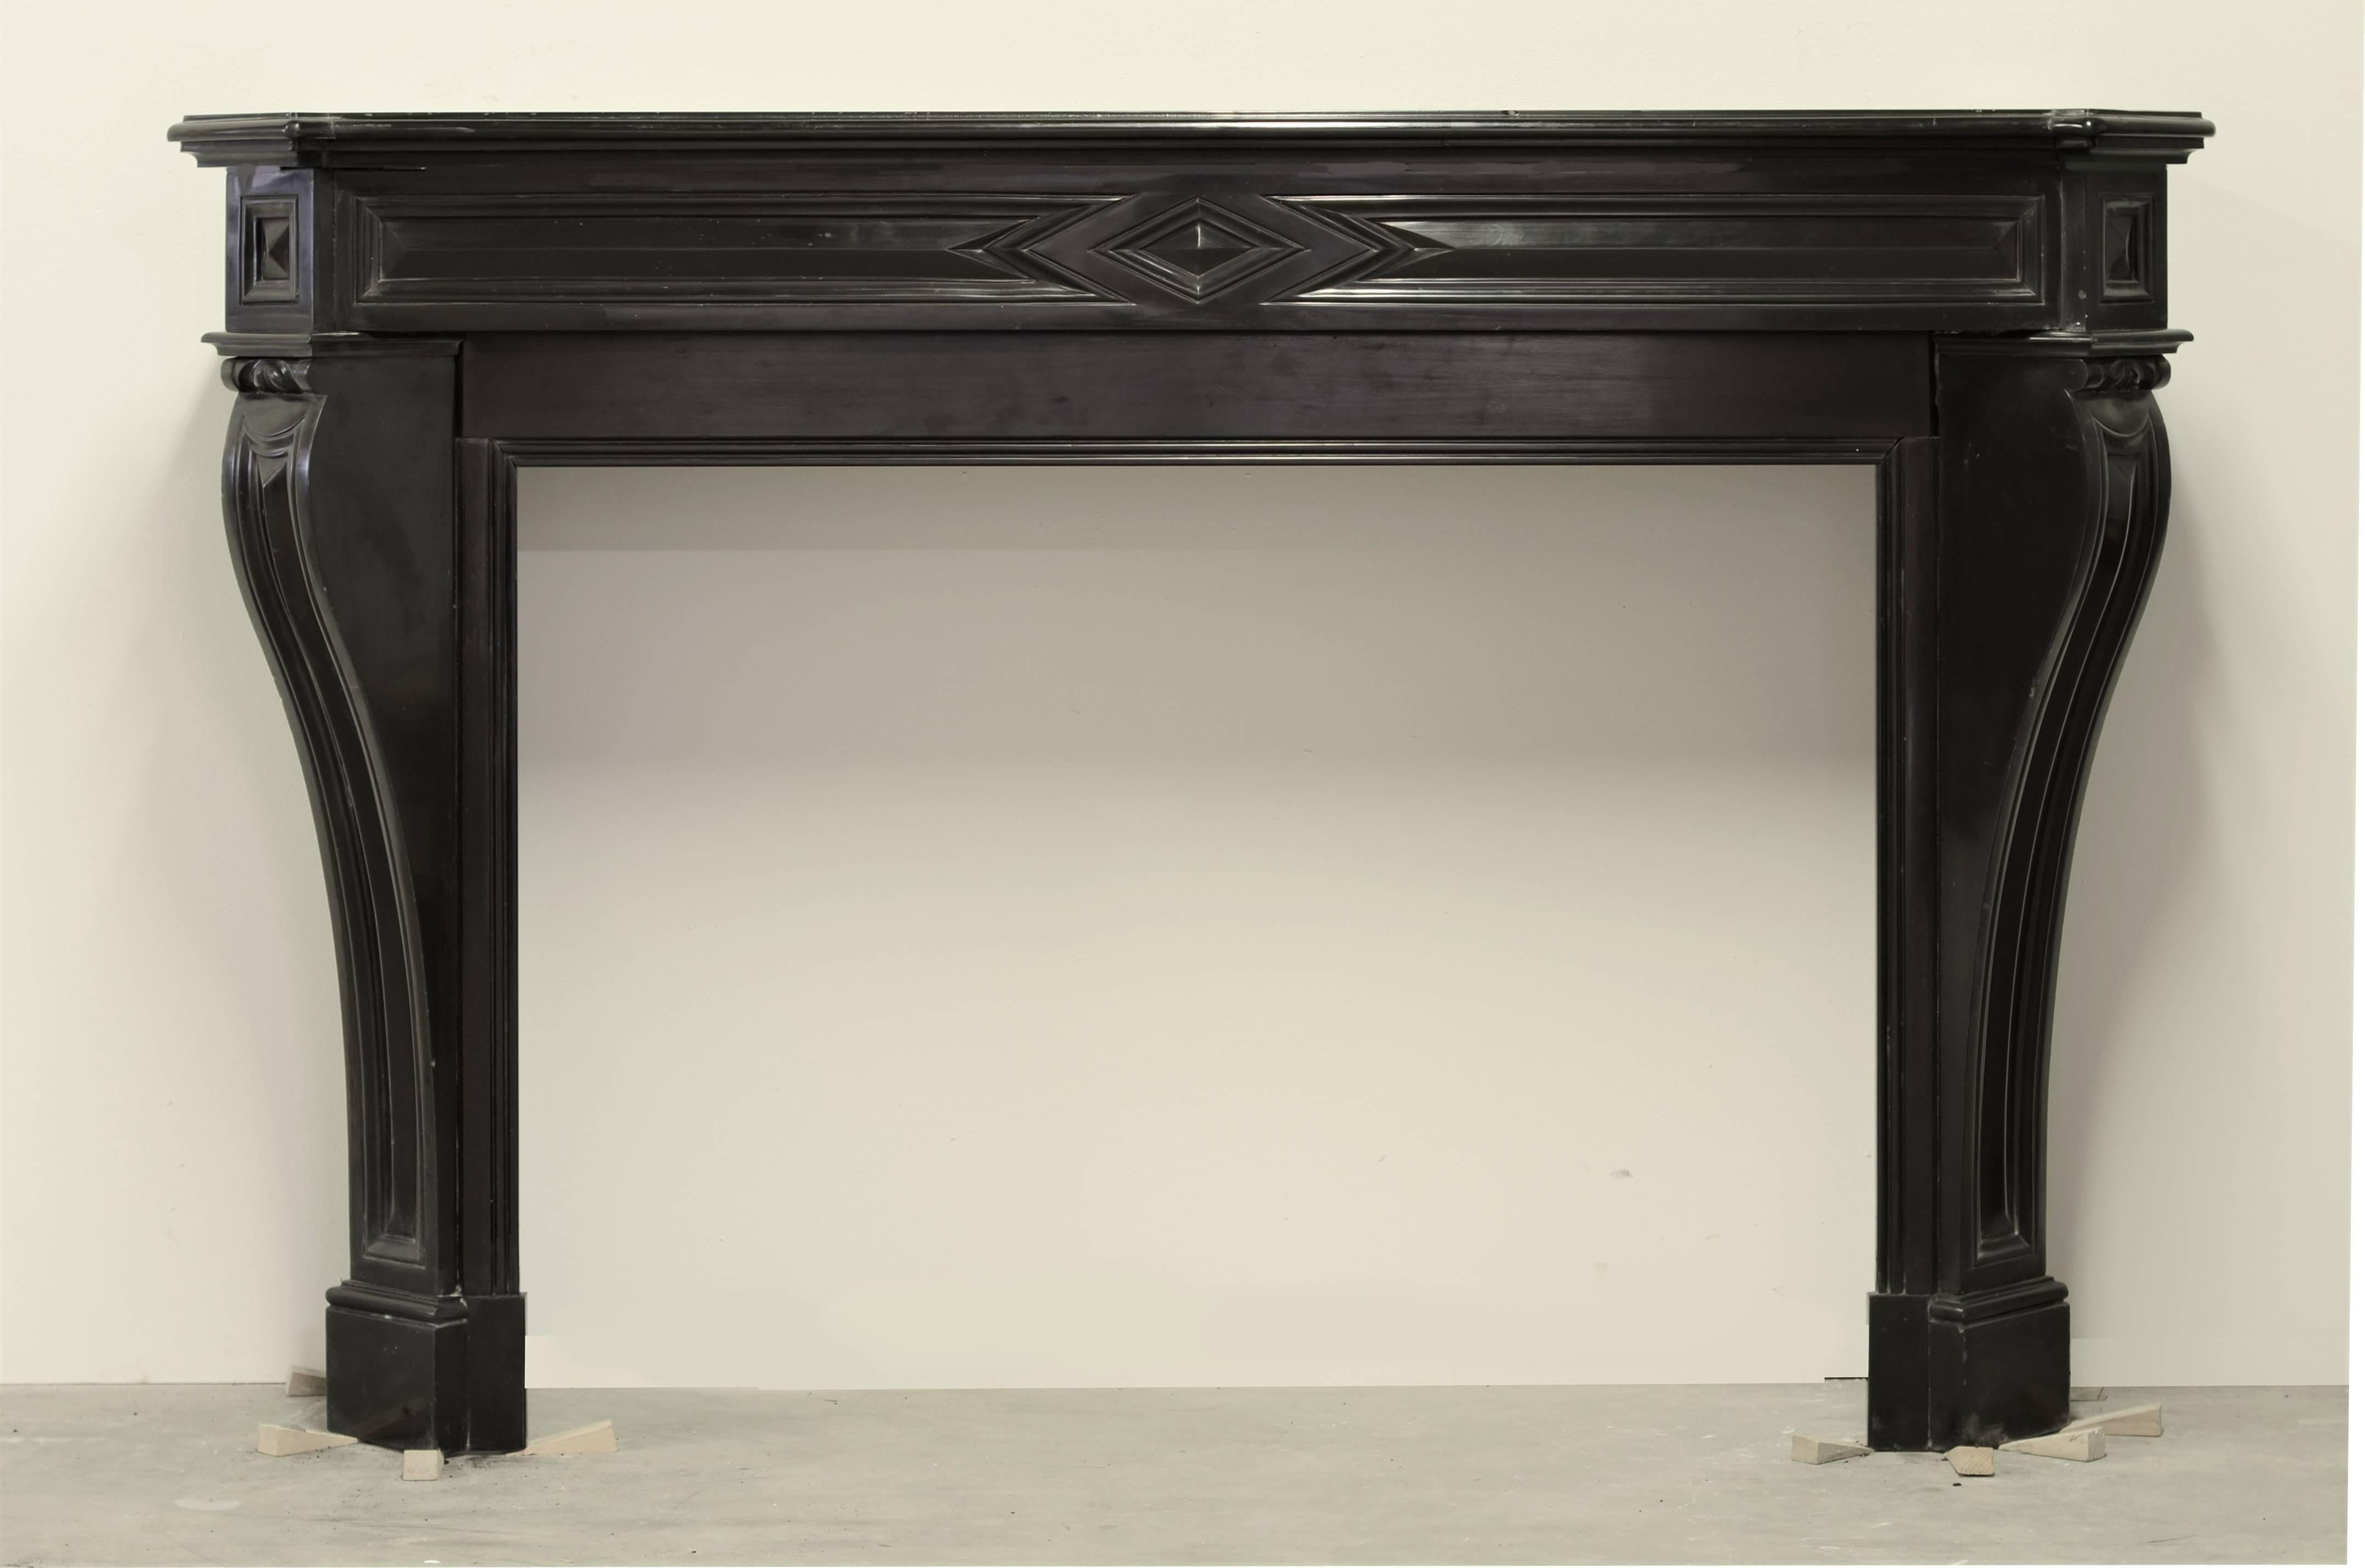 A very nice French Louis XVI style fireplace mantel mad from deep black Belgian marble.
The size an proportions make this piece very suitable for a smaller room.

Opening is 29.13 inch (74 cm)  high and 39.37 inches (100 cm) wide.

Marble floor not